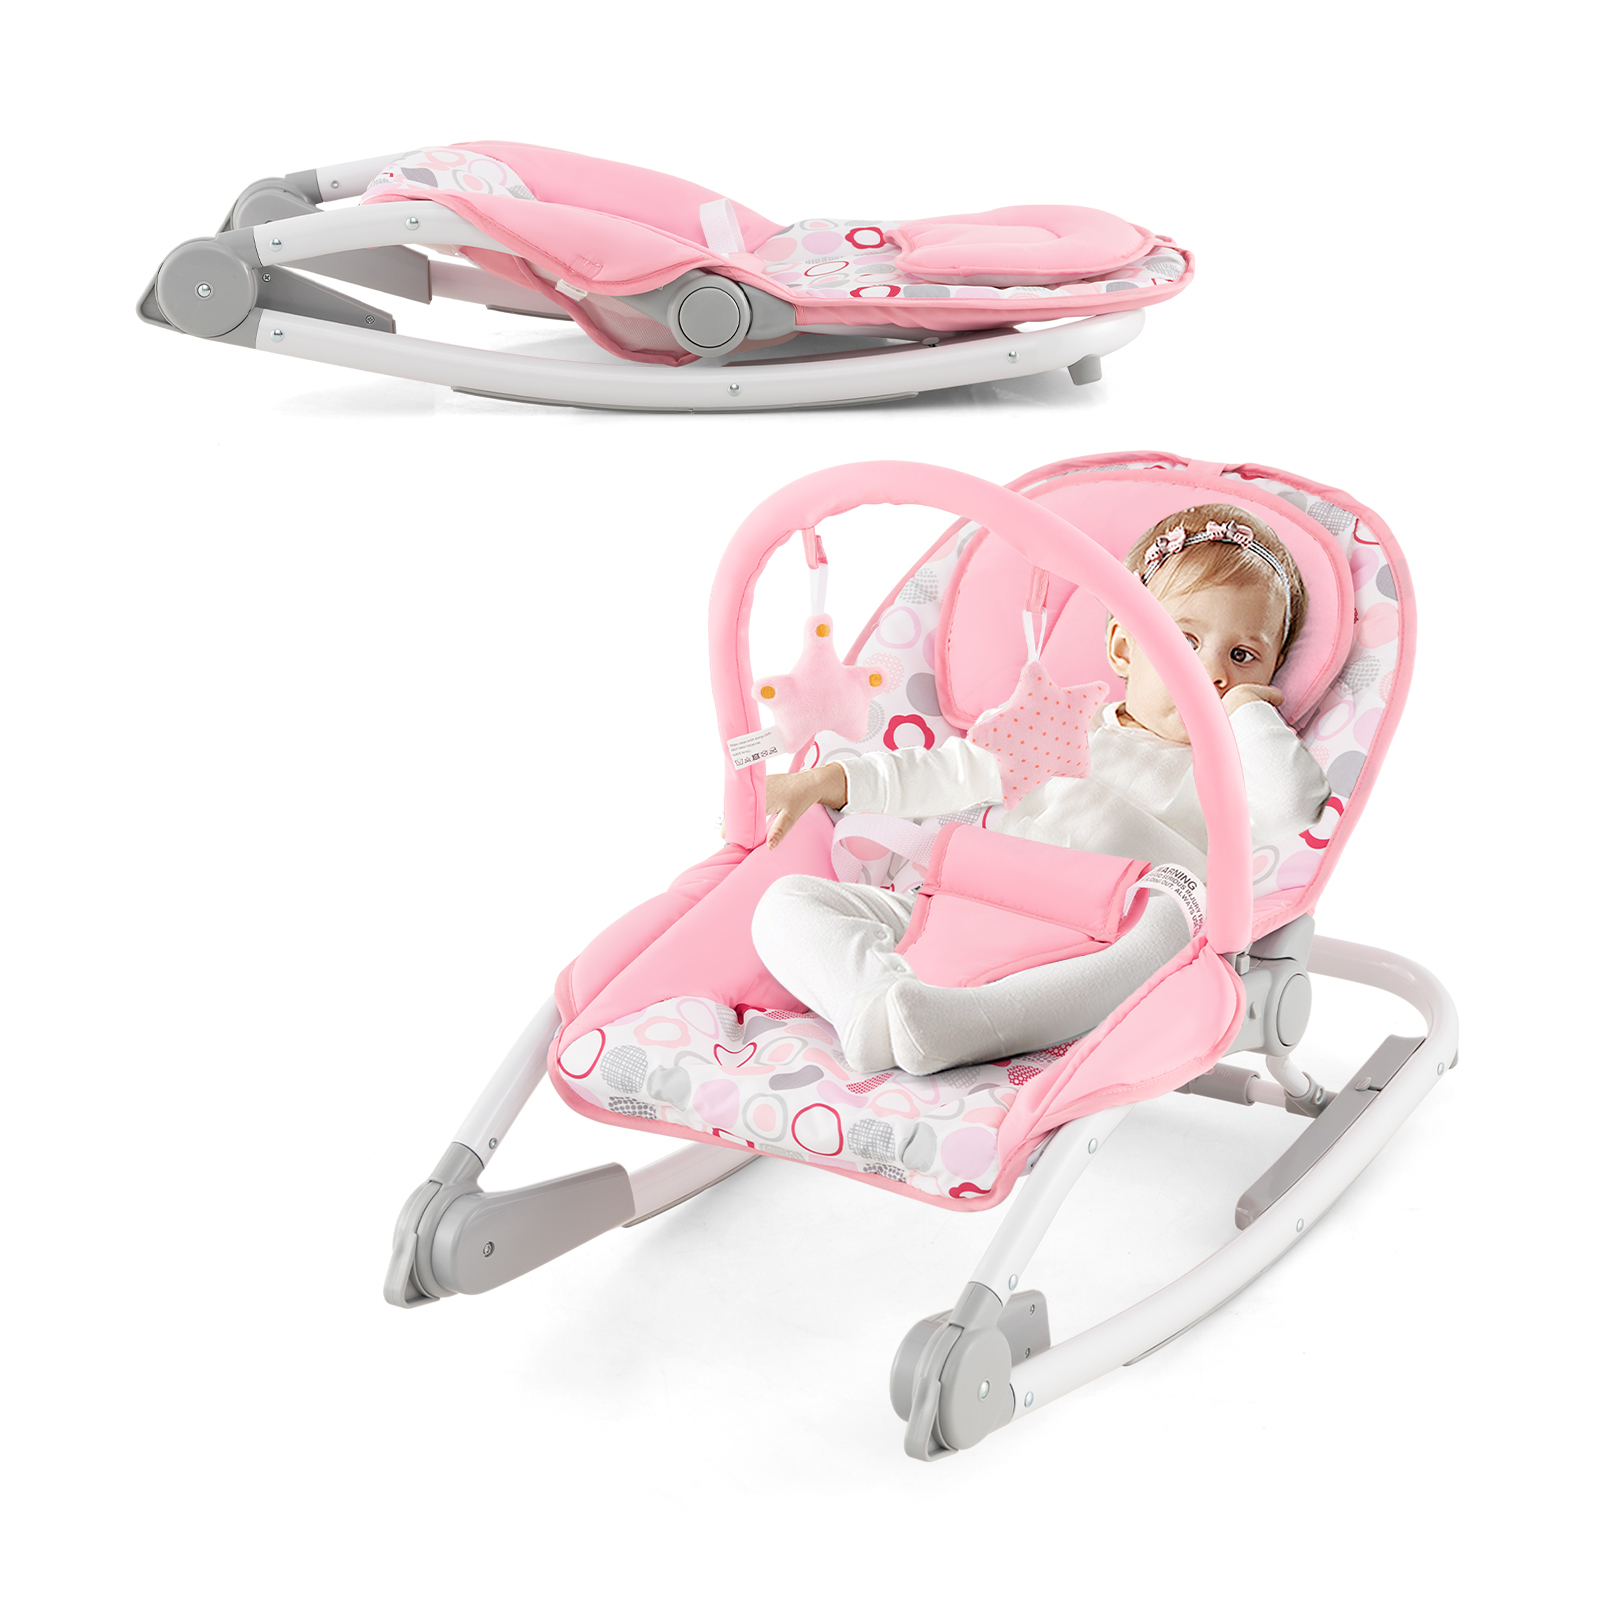 2-In-1 Portable Baby Rocker with Adjustable Backrest and Safety Belt-Pink